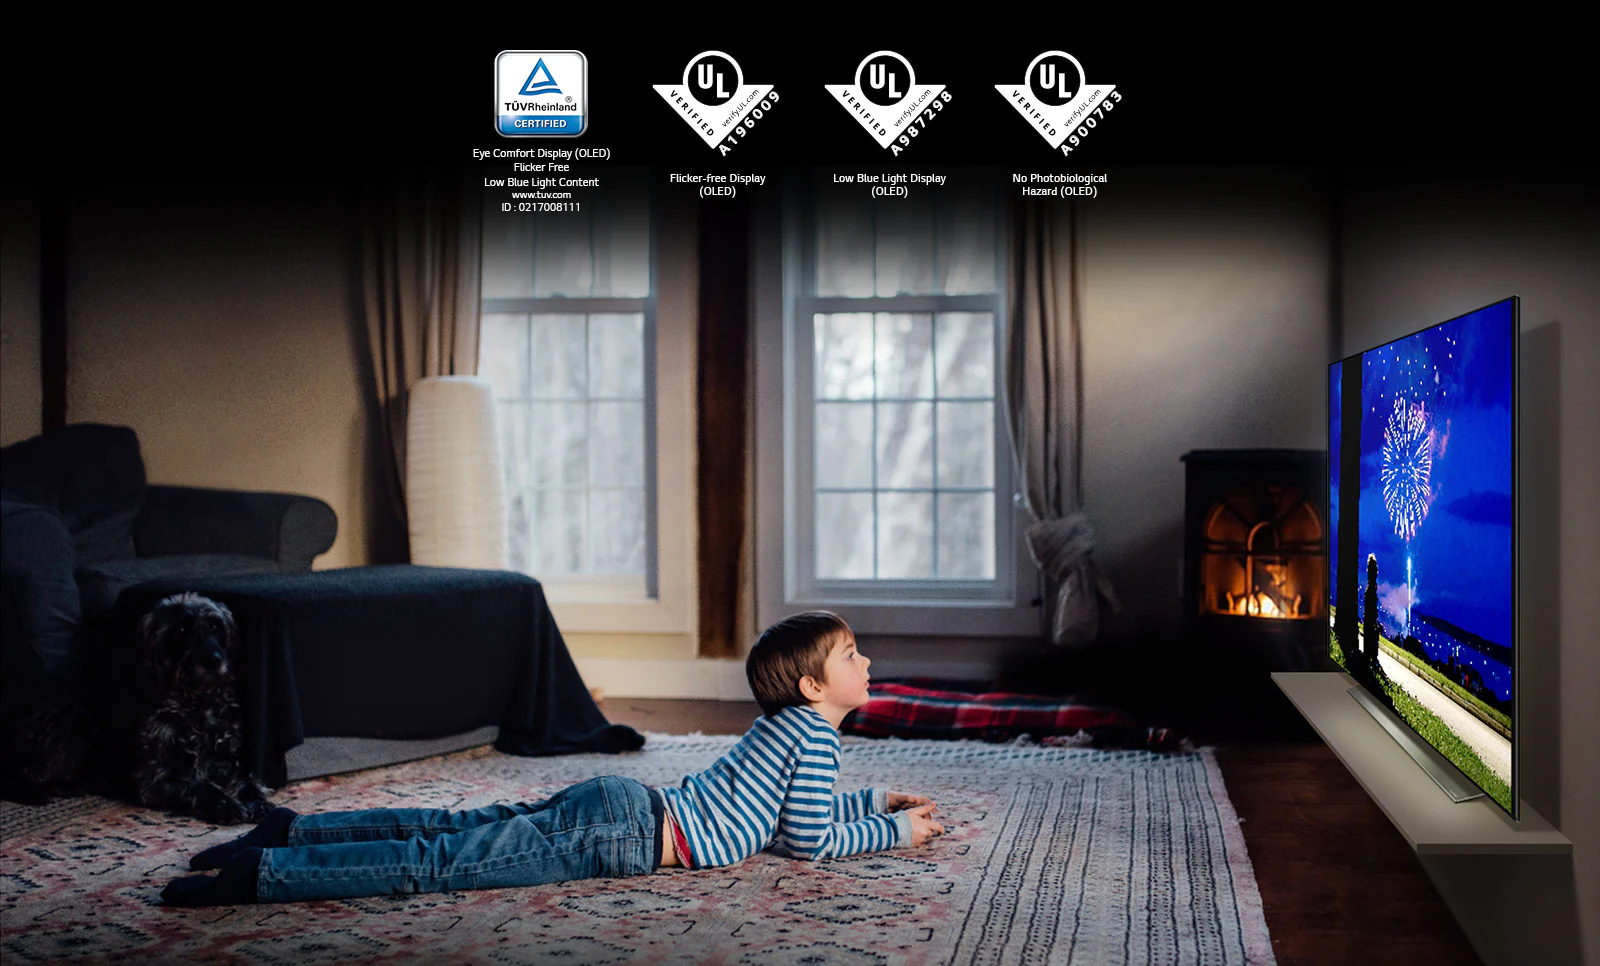 "This is the card describing the ""Eye Comfort Display"". This is a scene of a boy watching TV in a prone position. Four logos have been placed for ""Eye Comfort Display"" certification."